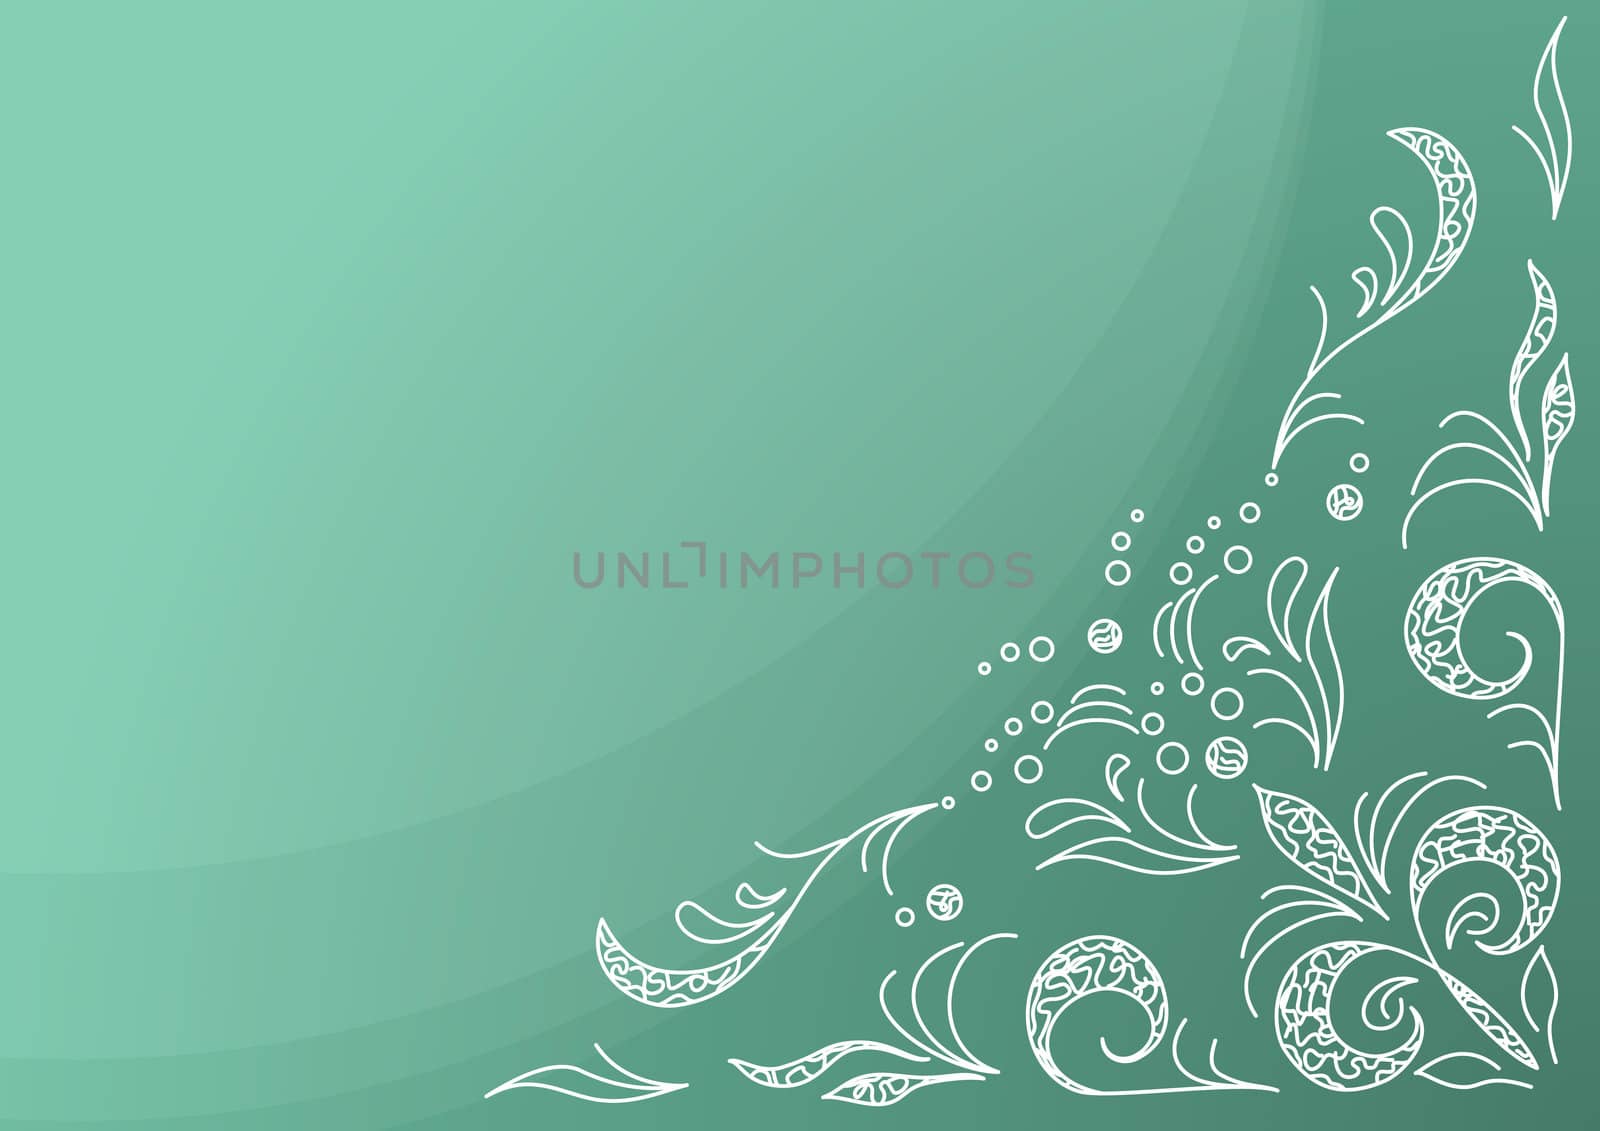 Abstract floral background: white lines, leaves and flowers on the green